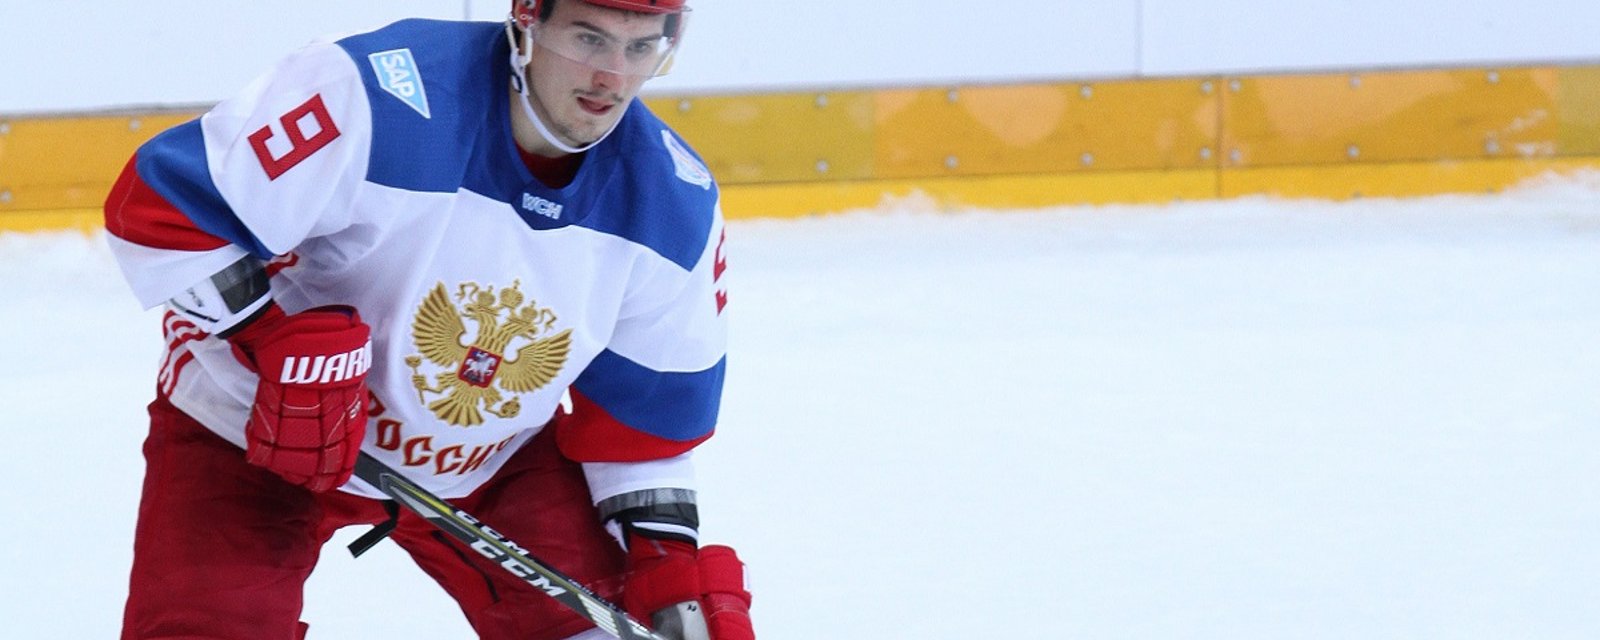 Orlov is not going to the KHL, signs new NHL contract.